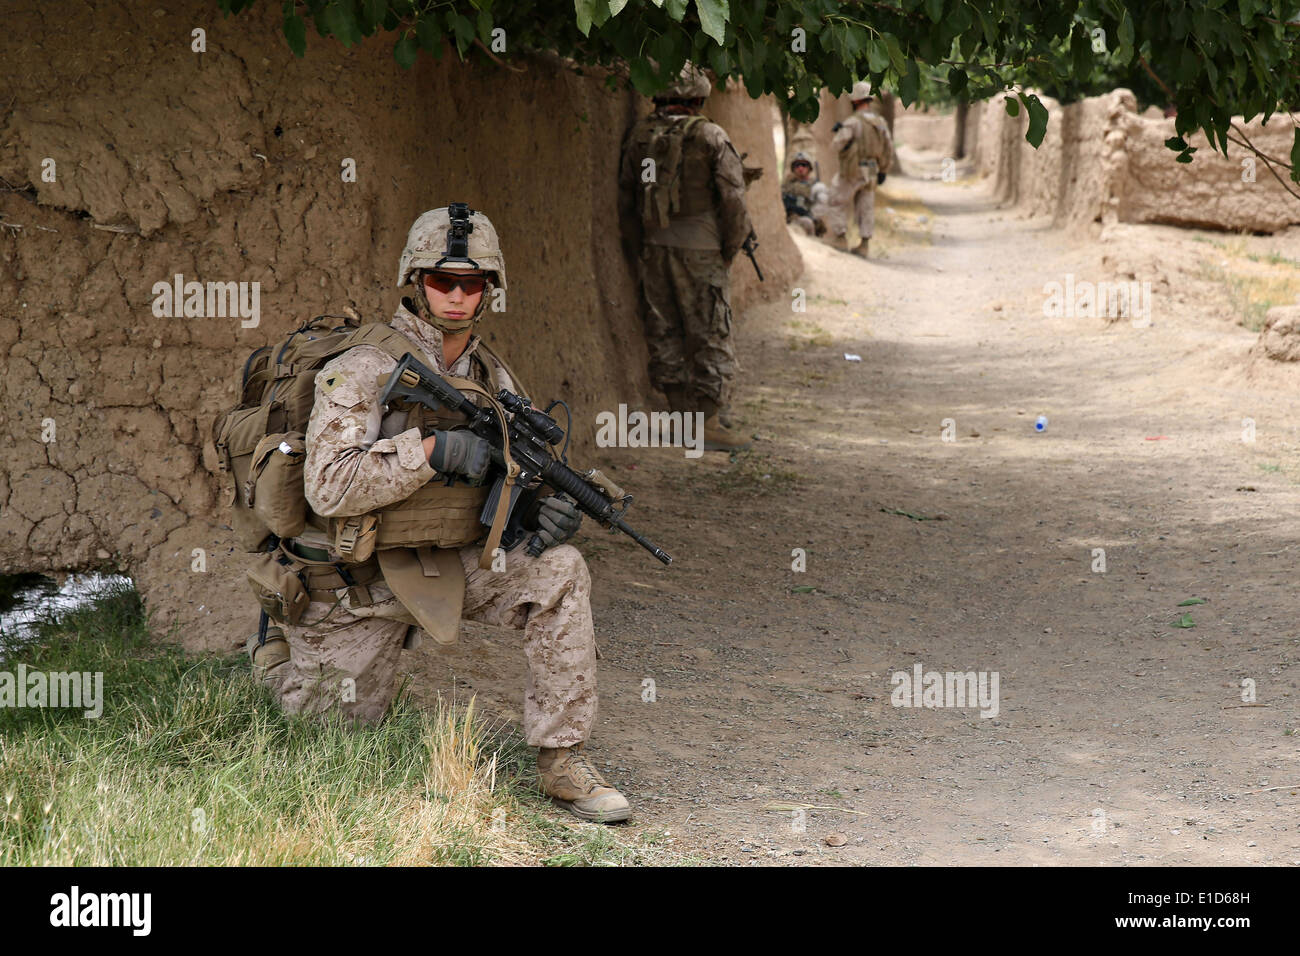 US Marines with the 1st Battalion, 7th Marine Regiment, patrol during a counter-insurgency mission May 16, 2014 in Larr Village, Helmand province, Afghanistan. Stock Photo